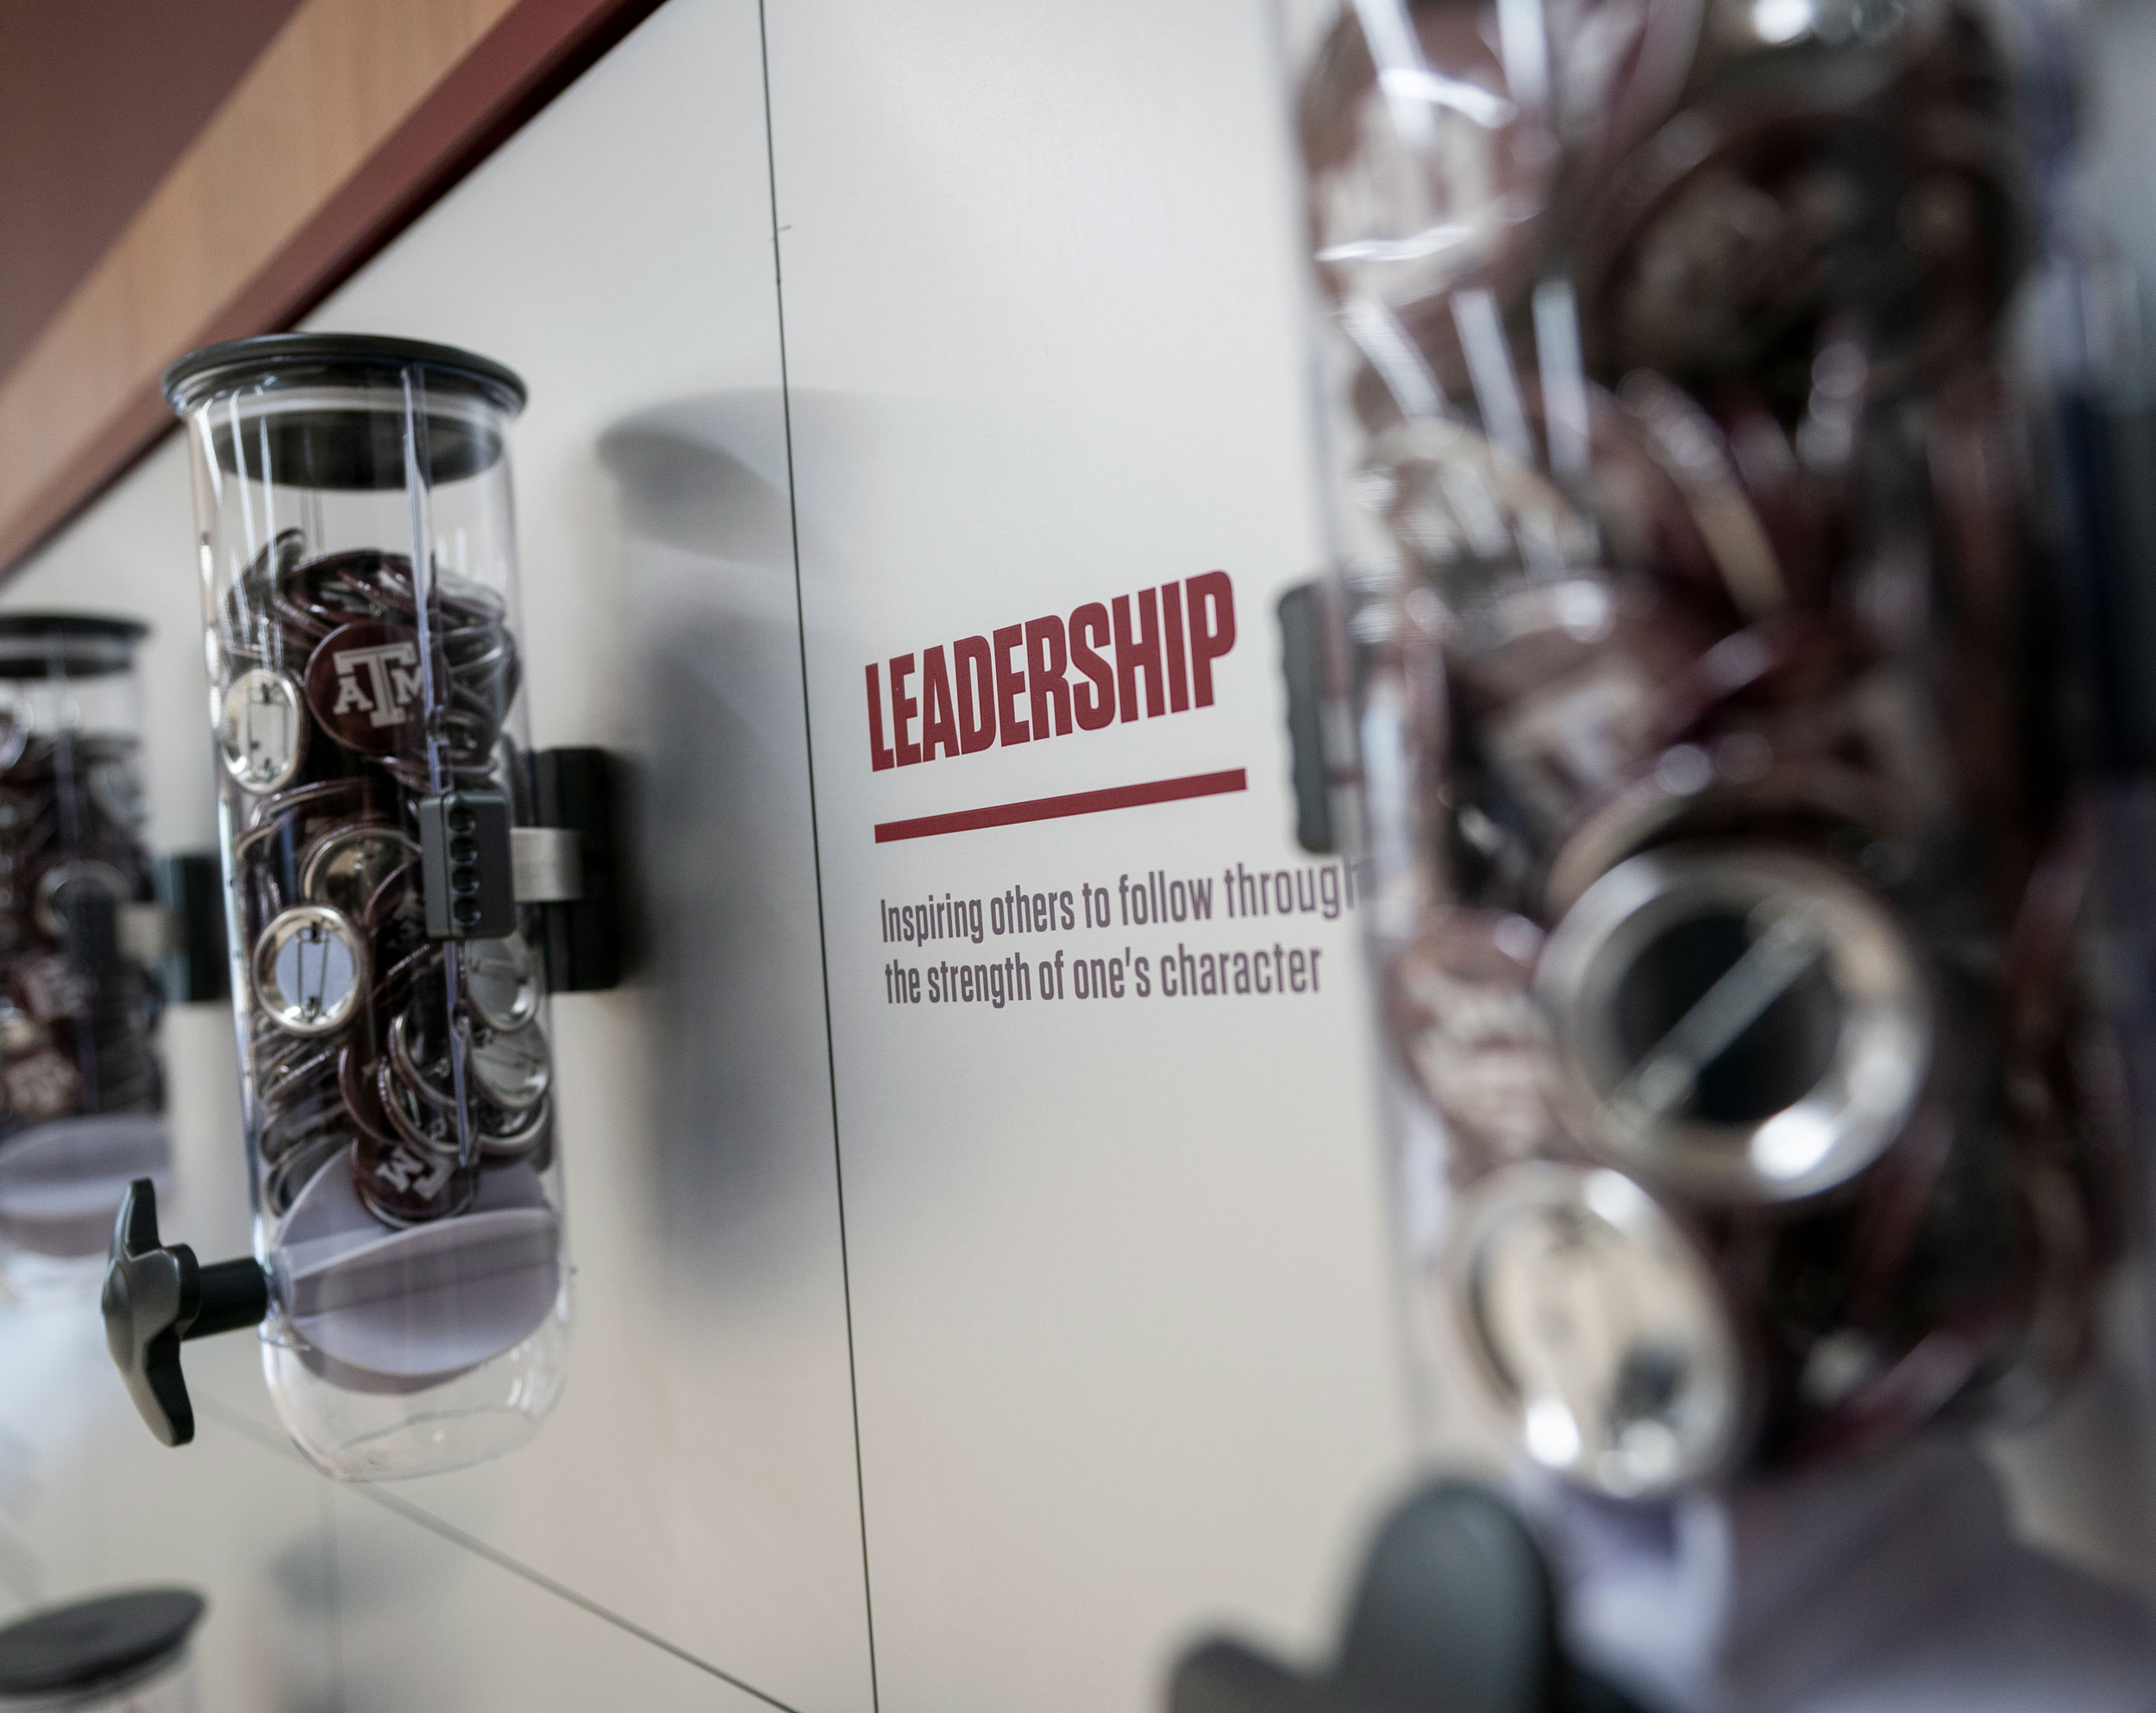 Buttons with the Texas A&M logo on them sit in a plastic container next to a sign that reads: "Leadership: Inspiring others to follow through the strength of one's character"